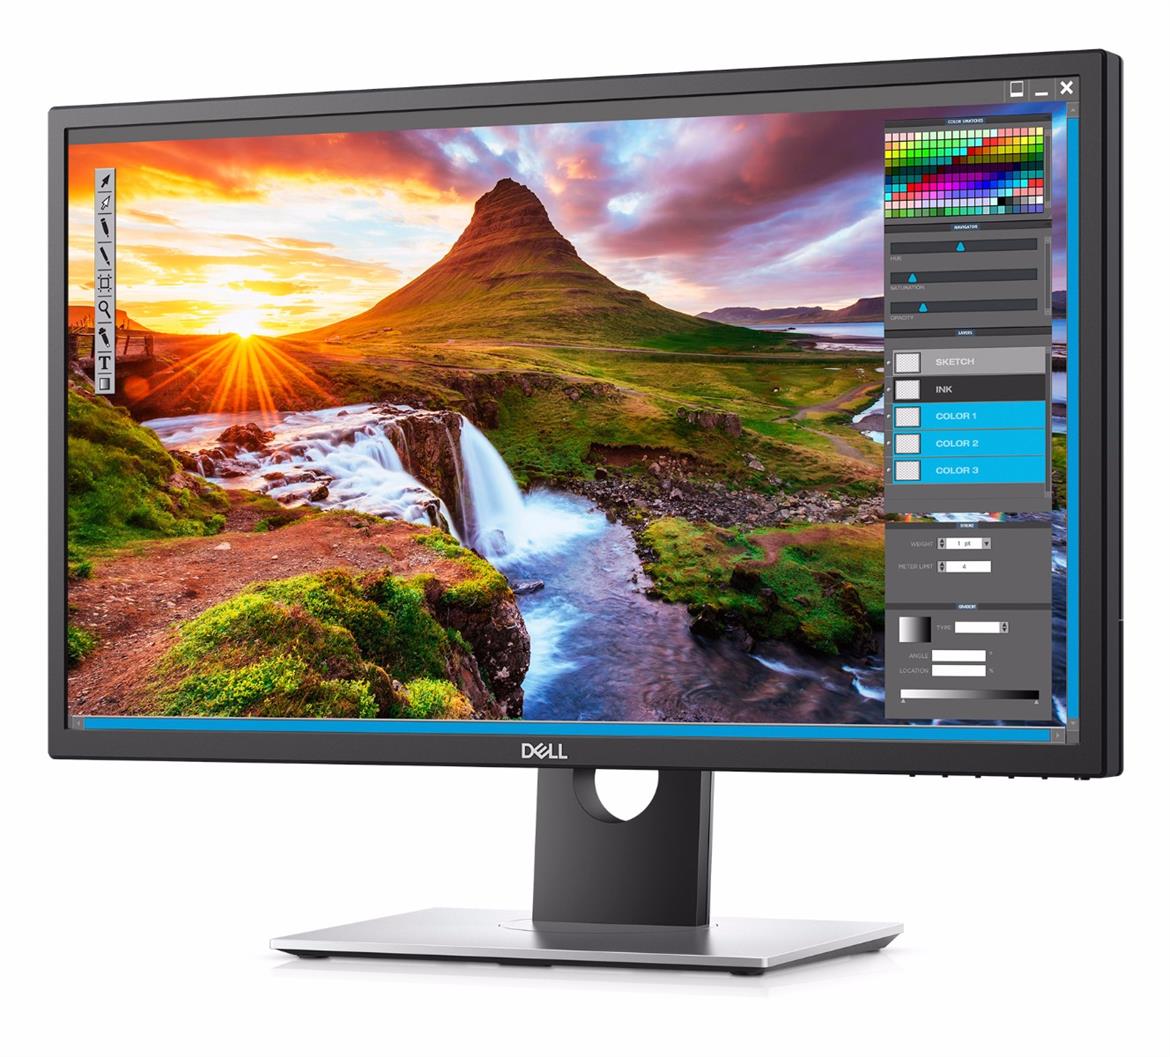 Dell Announces UltraSharp 27 4K Monitor UP2718Q With HDR10 Support